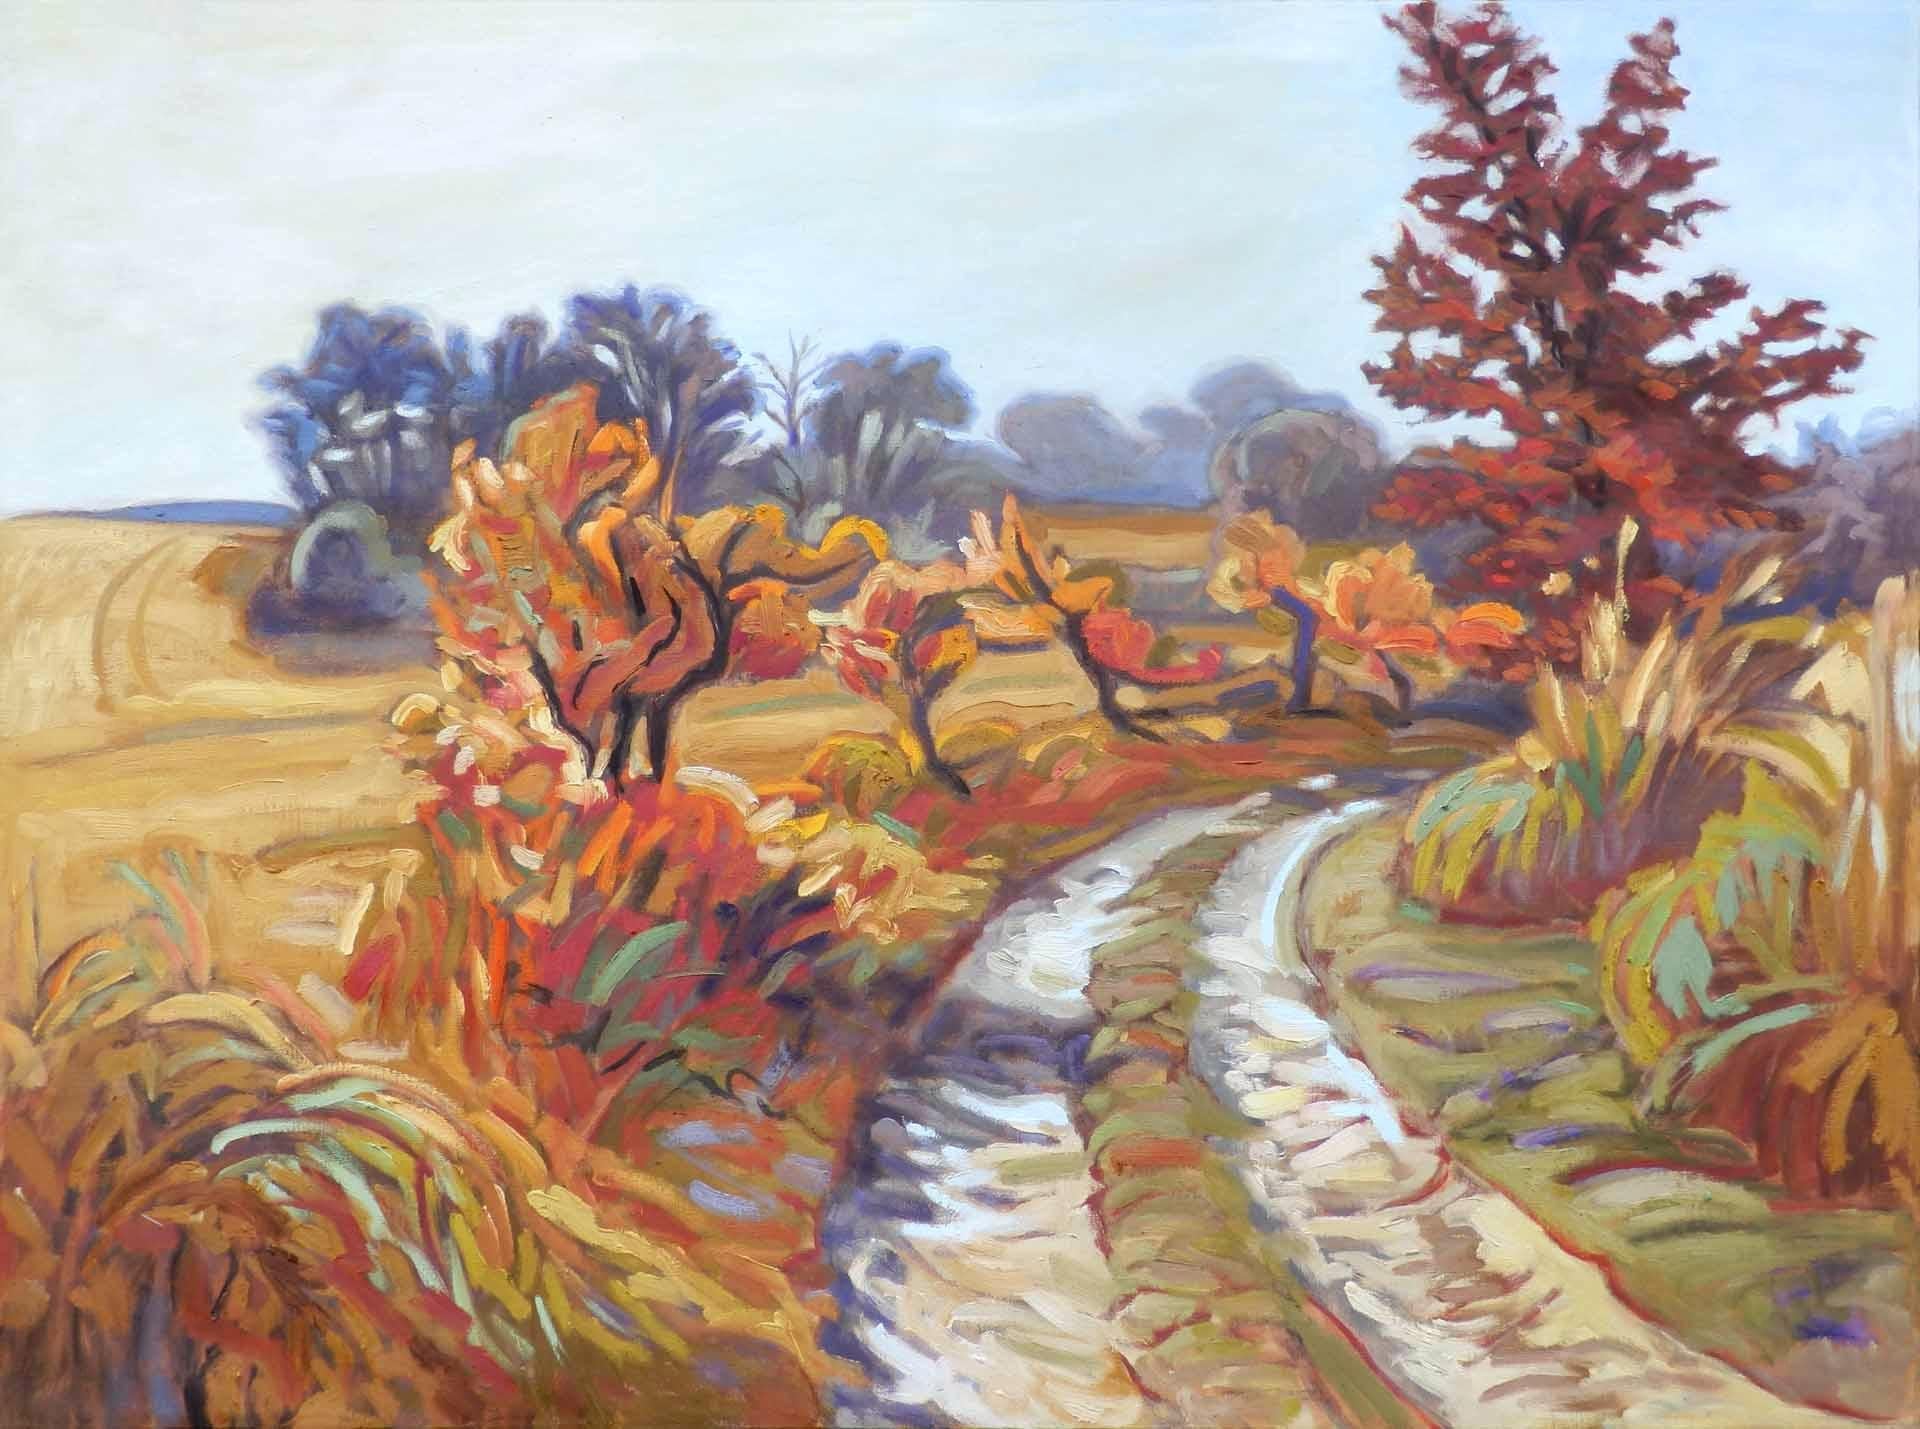 Yves Calméjane Figurative Painting - "The Fierce Seasons", Bold Fauvist French Autumnal Landscape Oil Painting